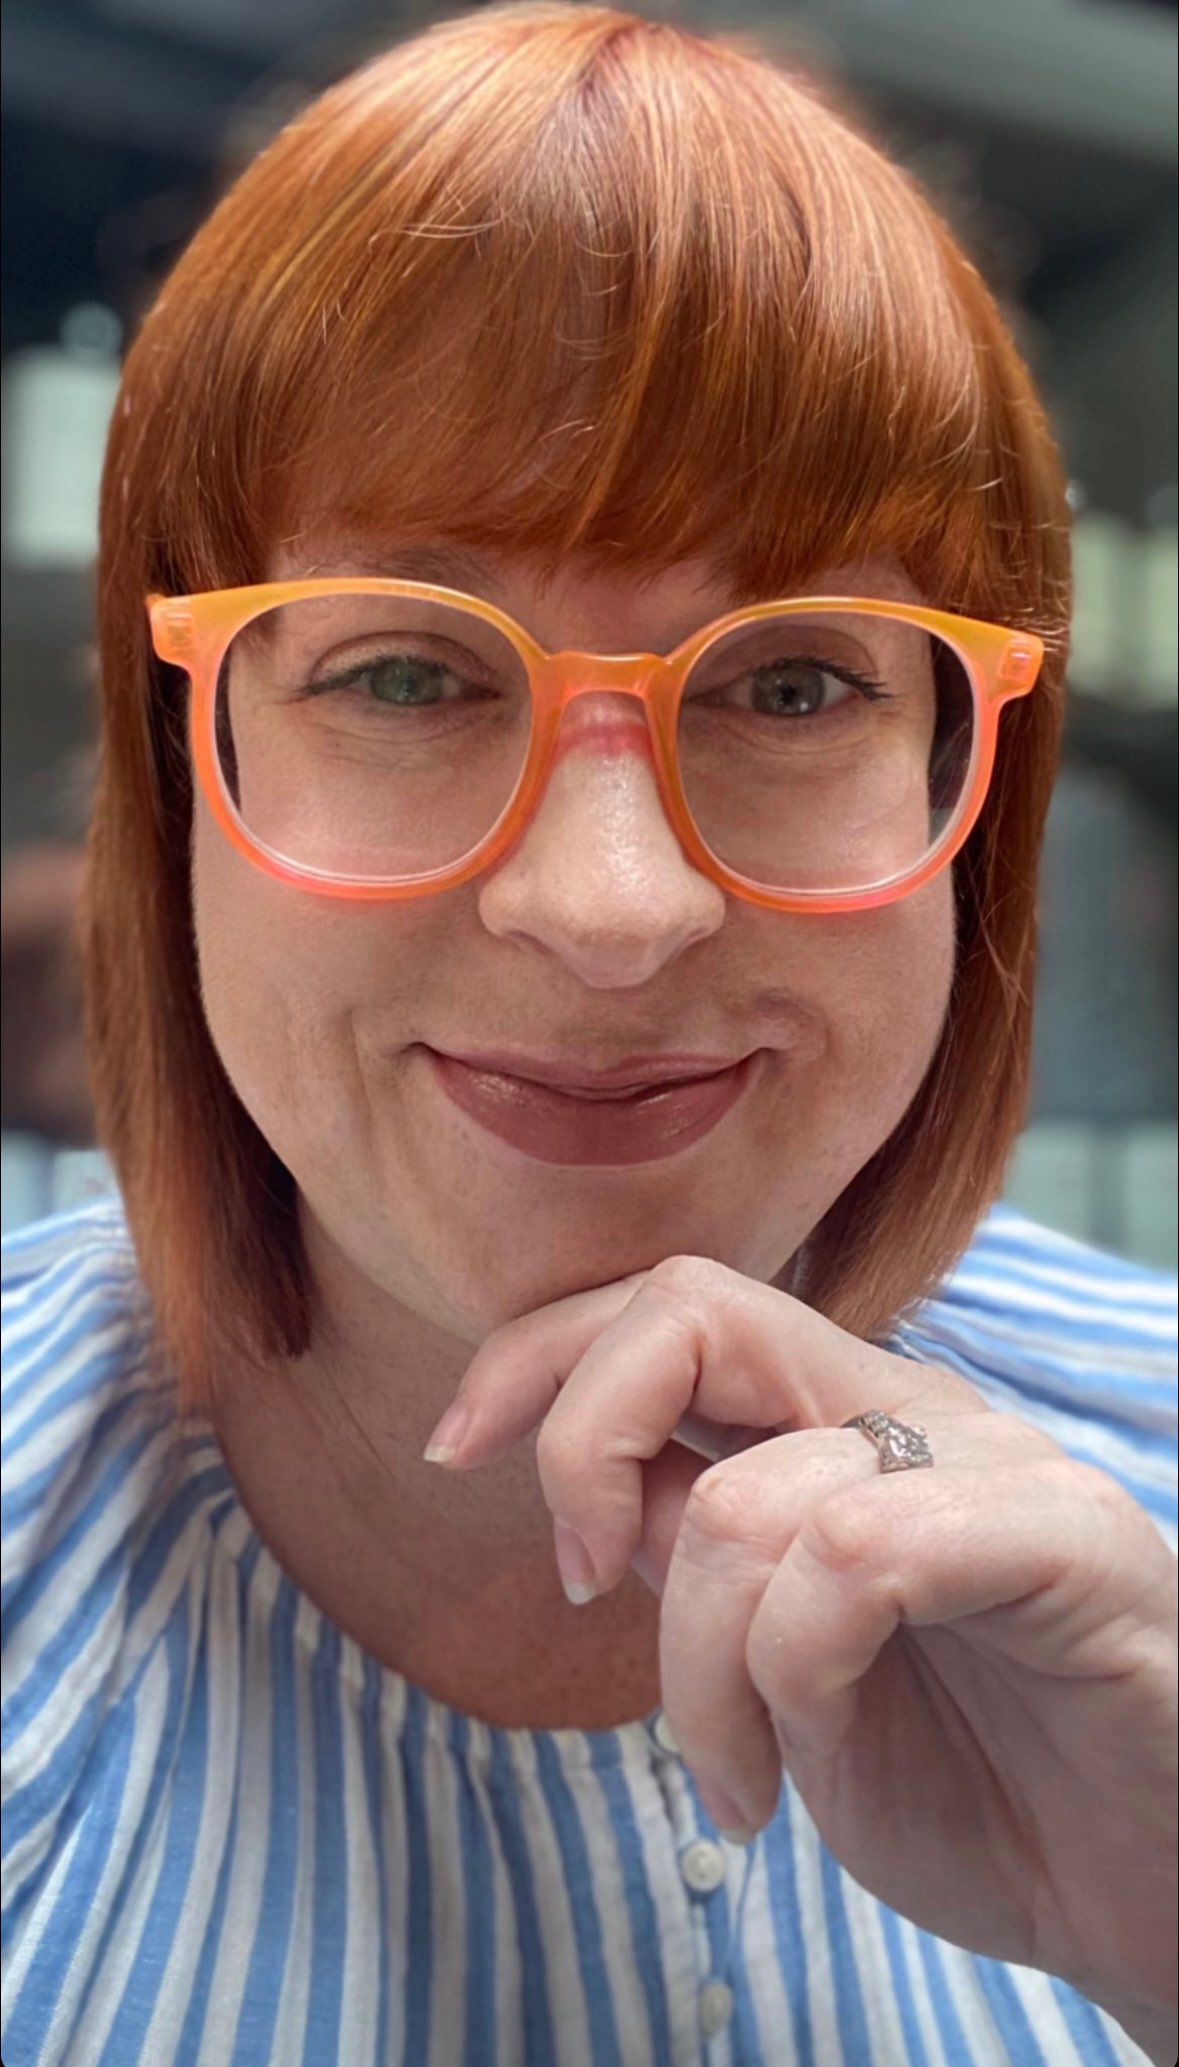 Heather Lesher smiles at the camera with cropped red hair and orange glasses frames.